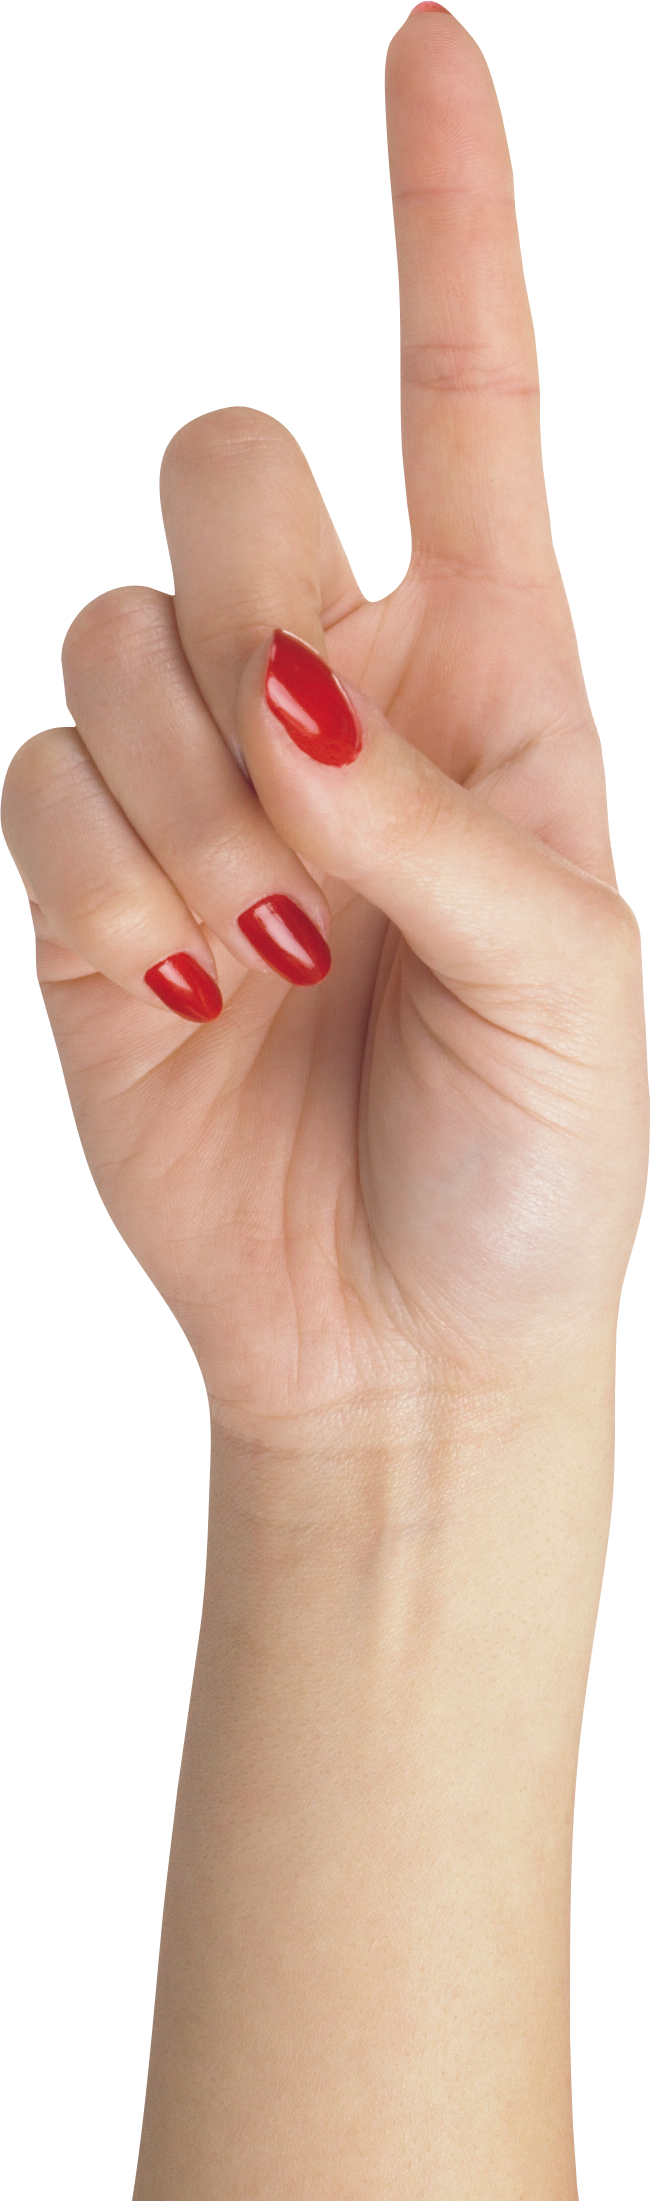 One Finger Hand PNG Image